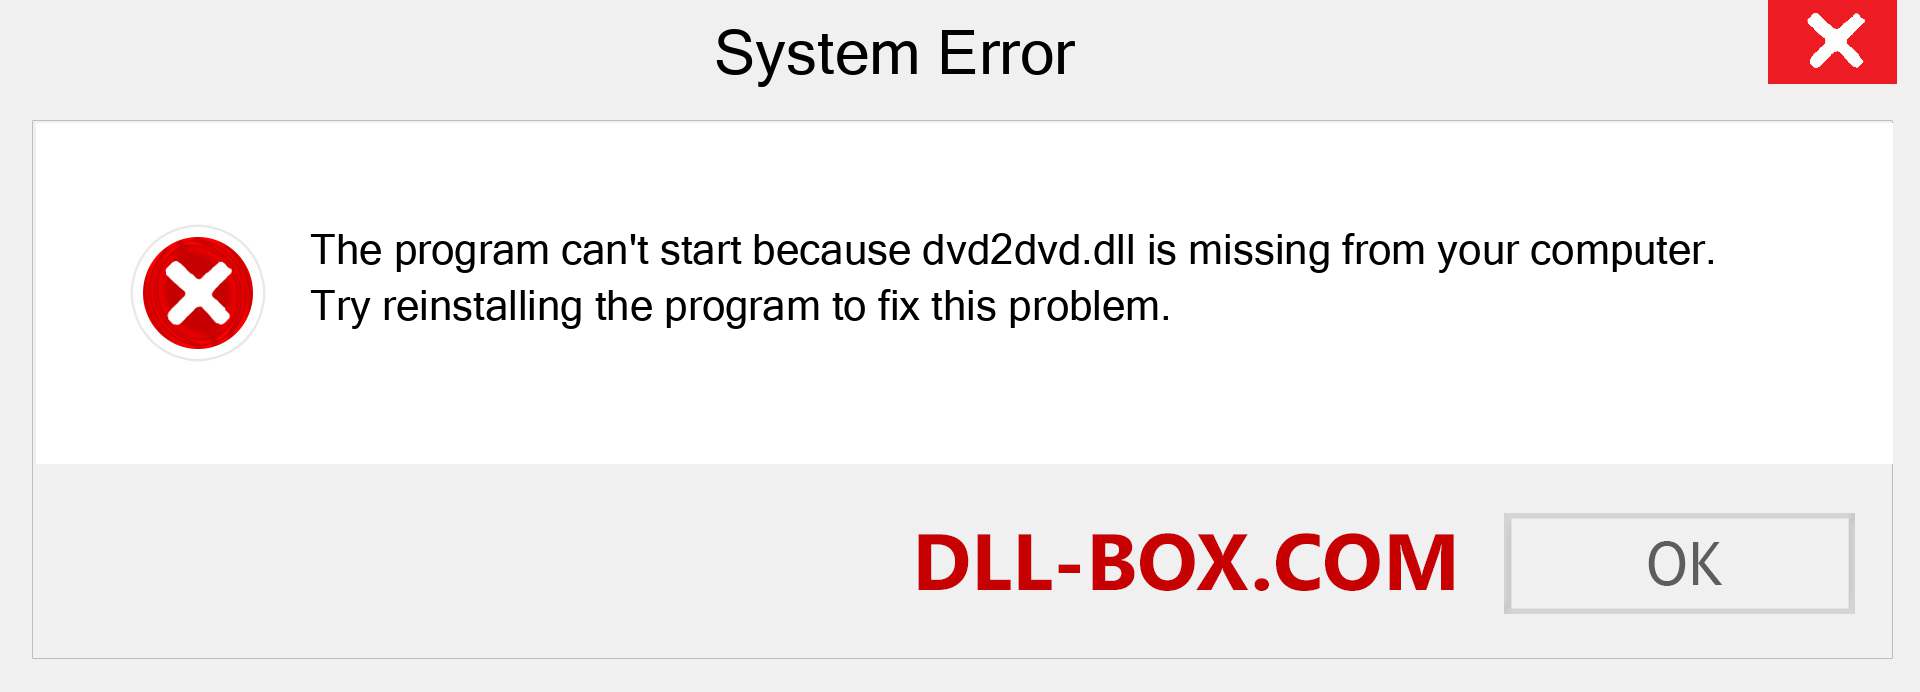  dvd2dvd.dll file is missing?. Download for Windows 7, 8, 10 - Fix  dvd2dvd dll Missing Error on Windows, photos, images